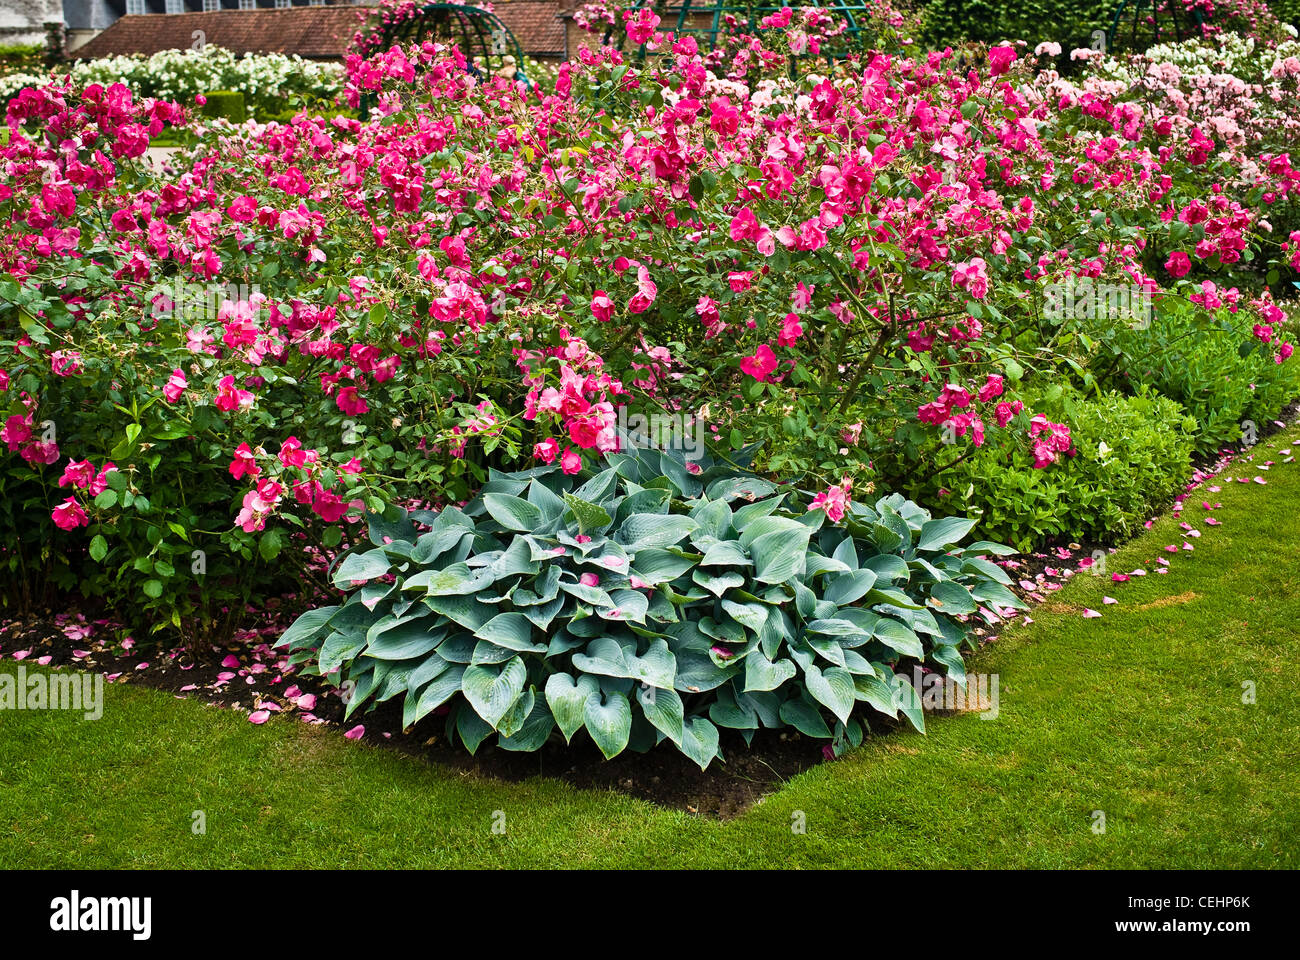 Rose Bed High Resolution Stock Photography and Images - Alamy